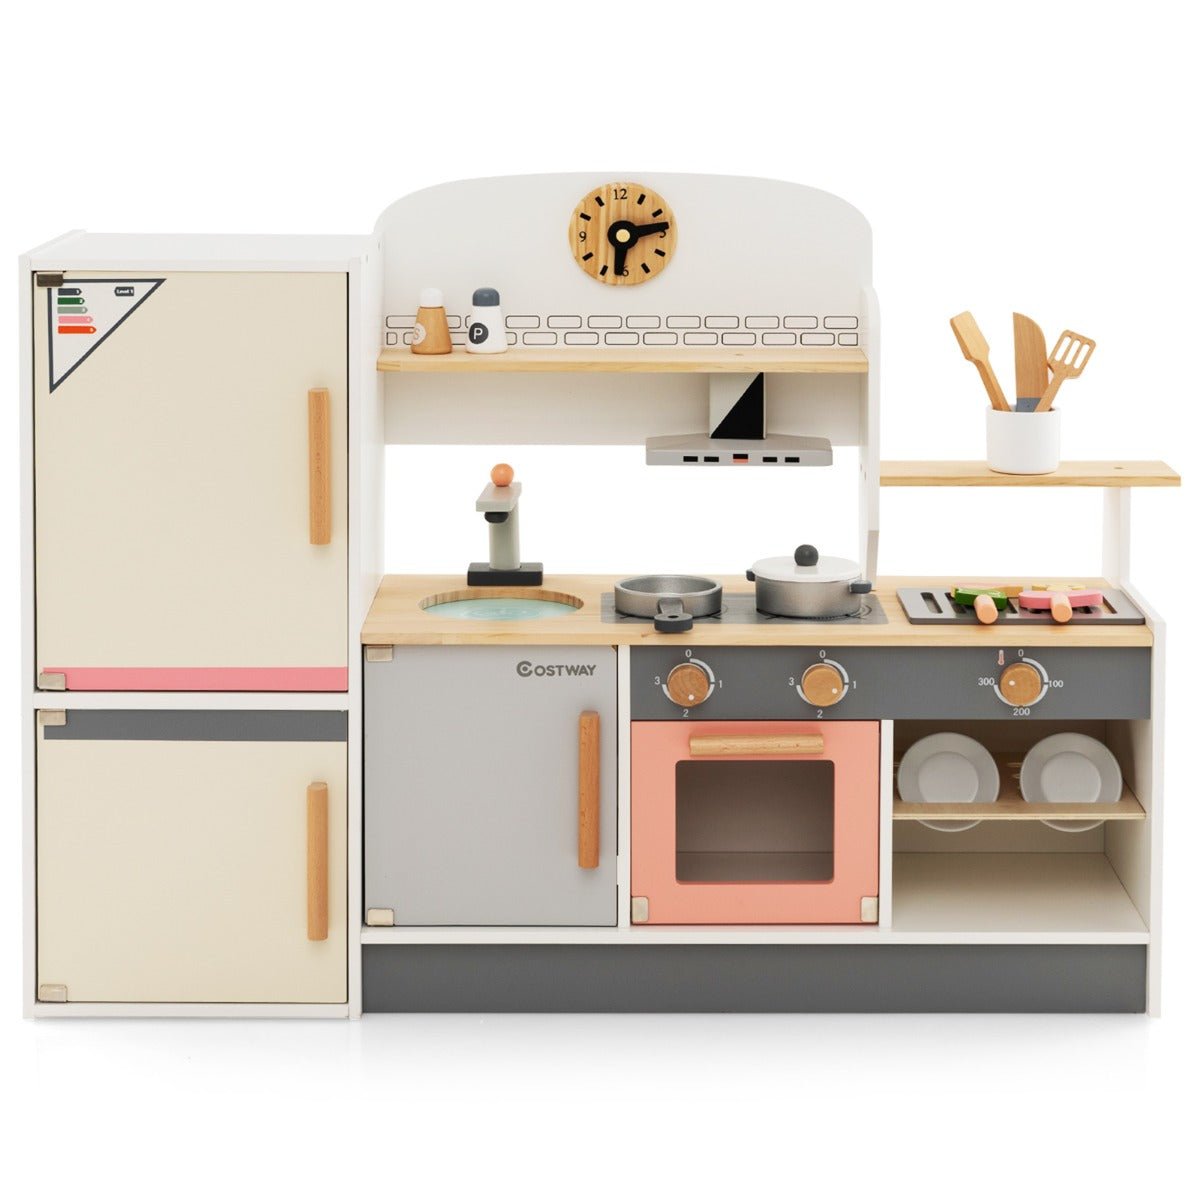 Realistic Chef Playset for Aspiring Young Cooks